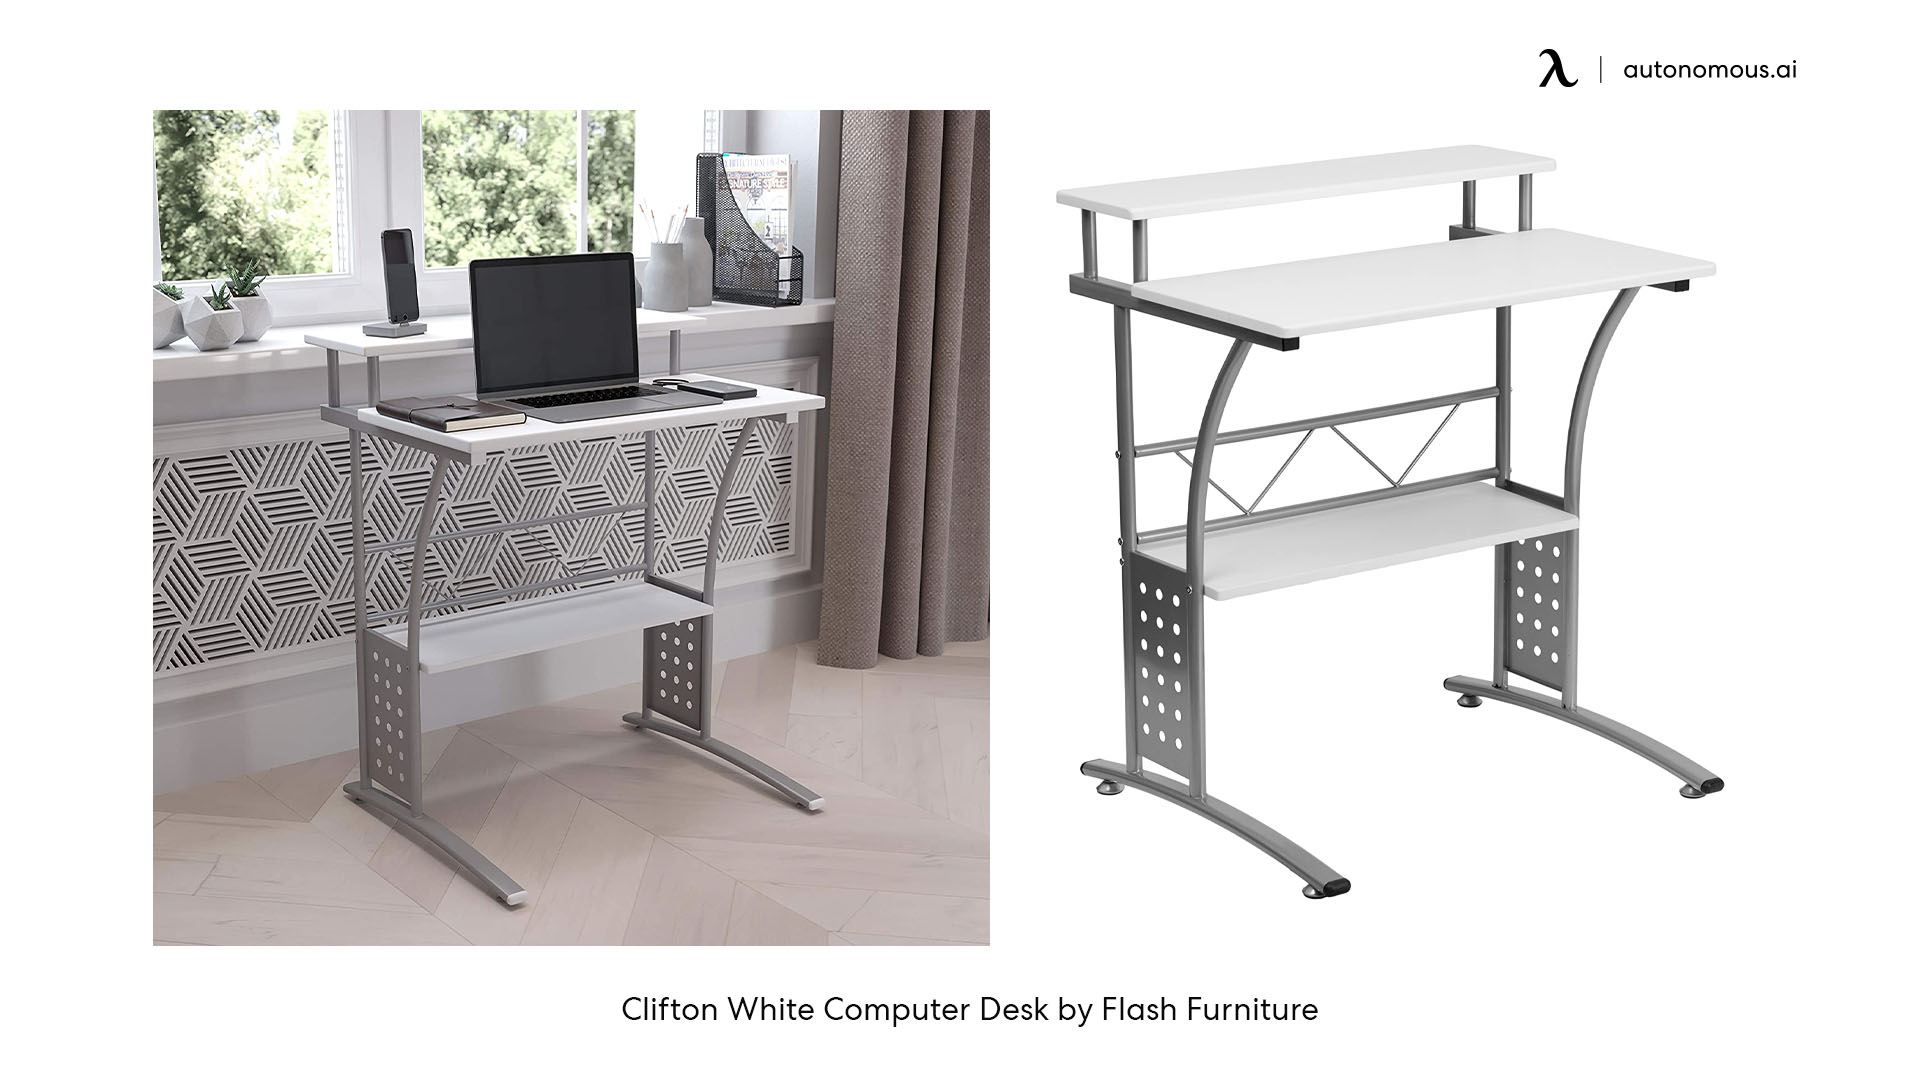 Clifton White Computer Desk by Flash Furniture